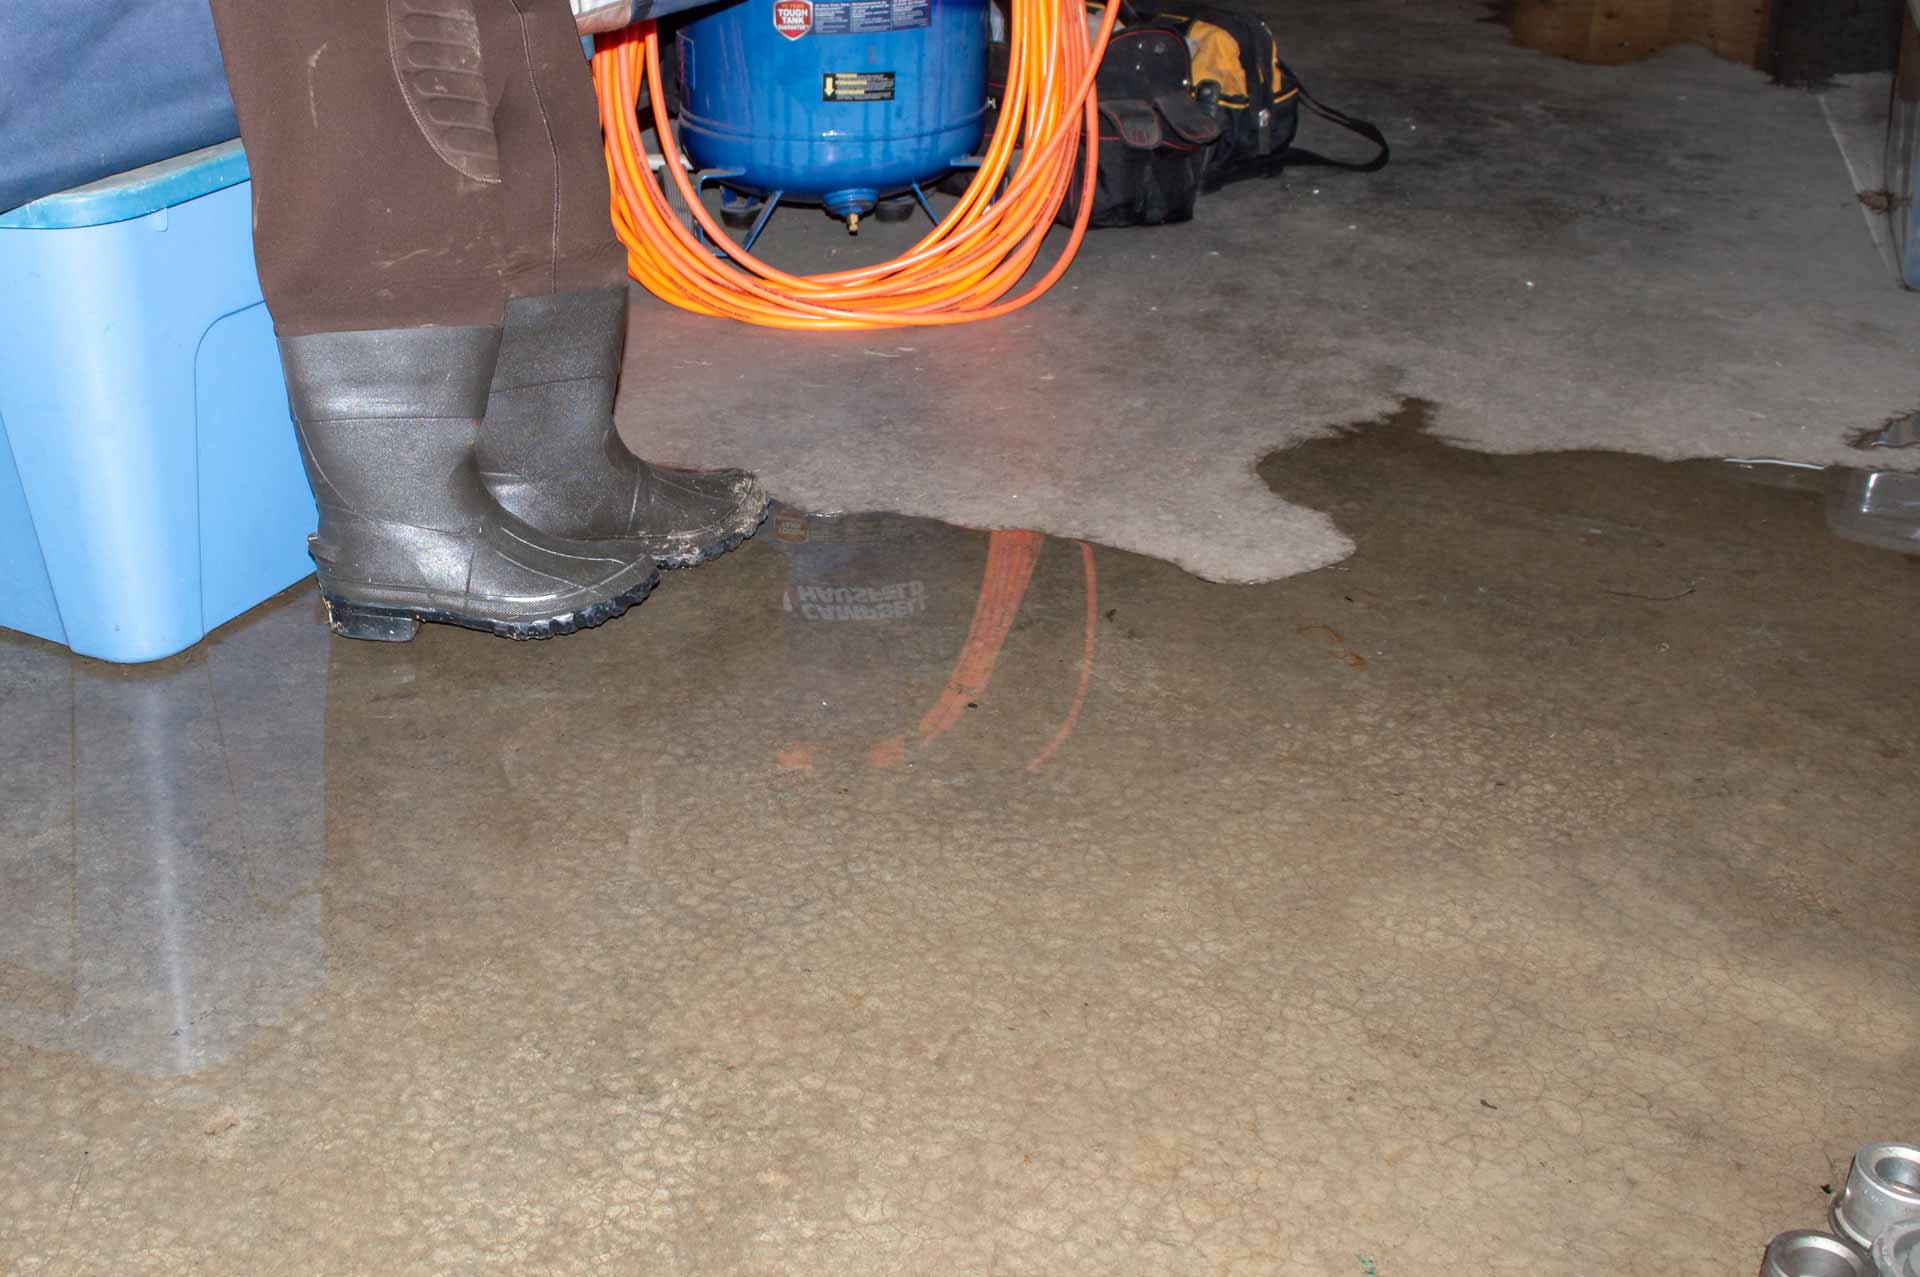 Flooded basement, close up shot of rubber boots